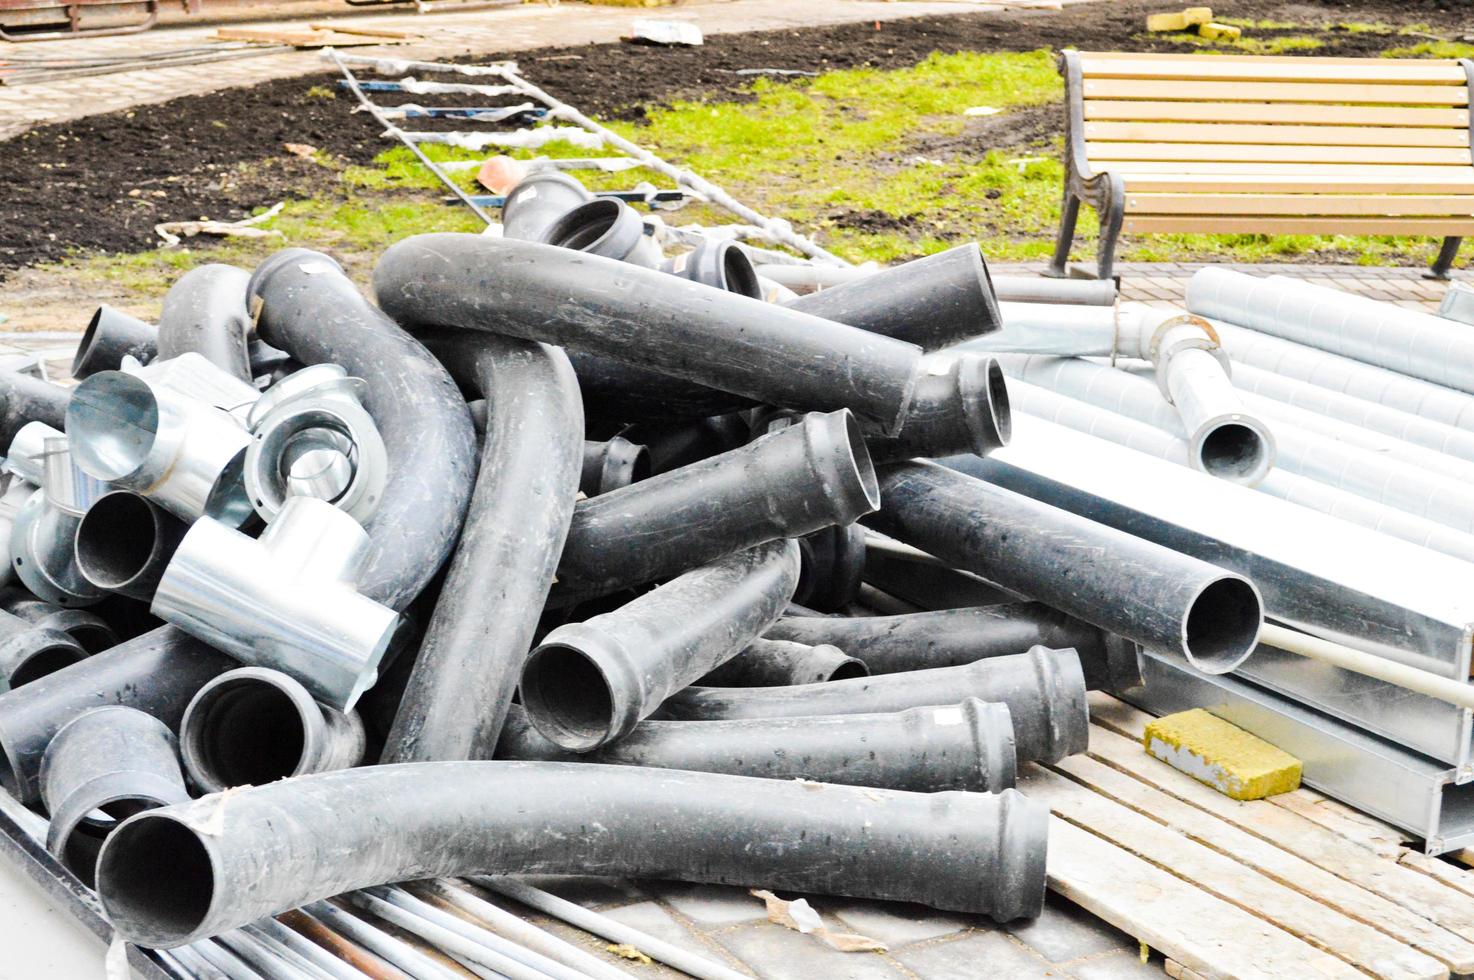 Large black plastic sewer plumbing pipes for the construction of water pipes or sewers at a construction site during the repair photo